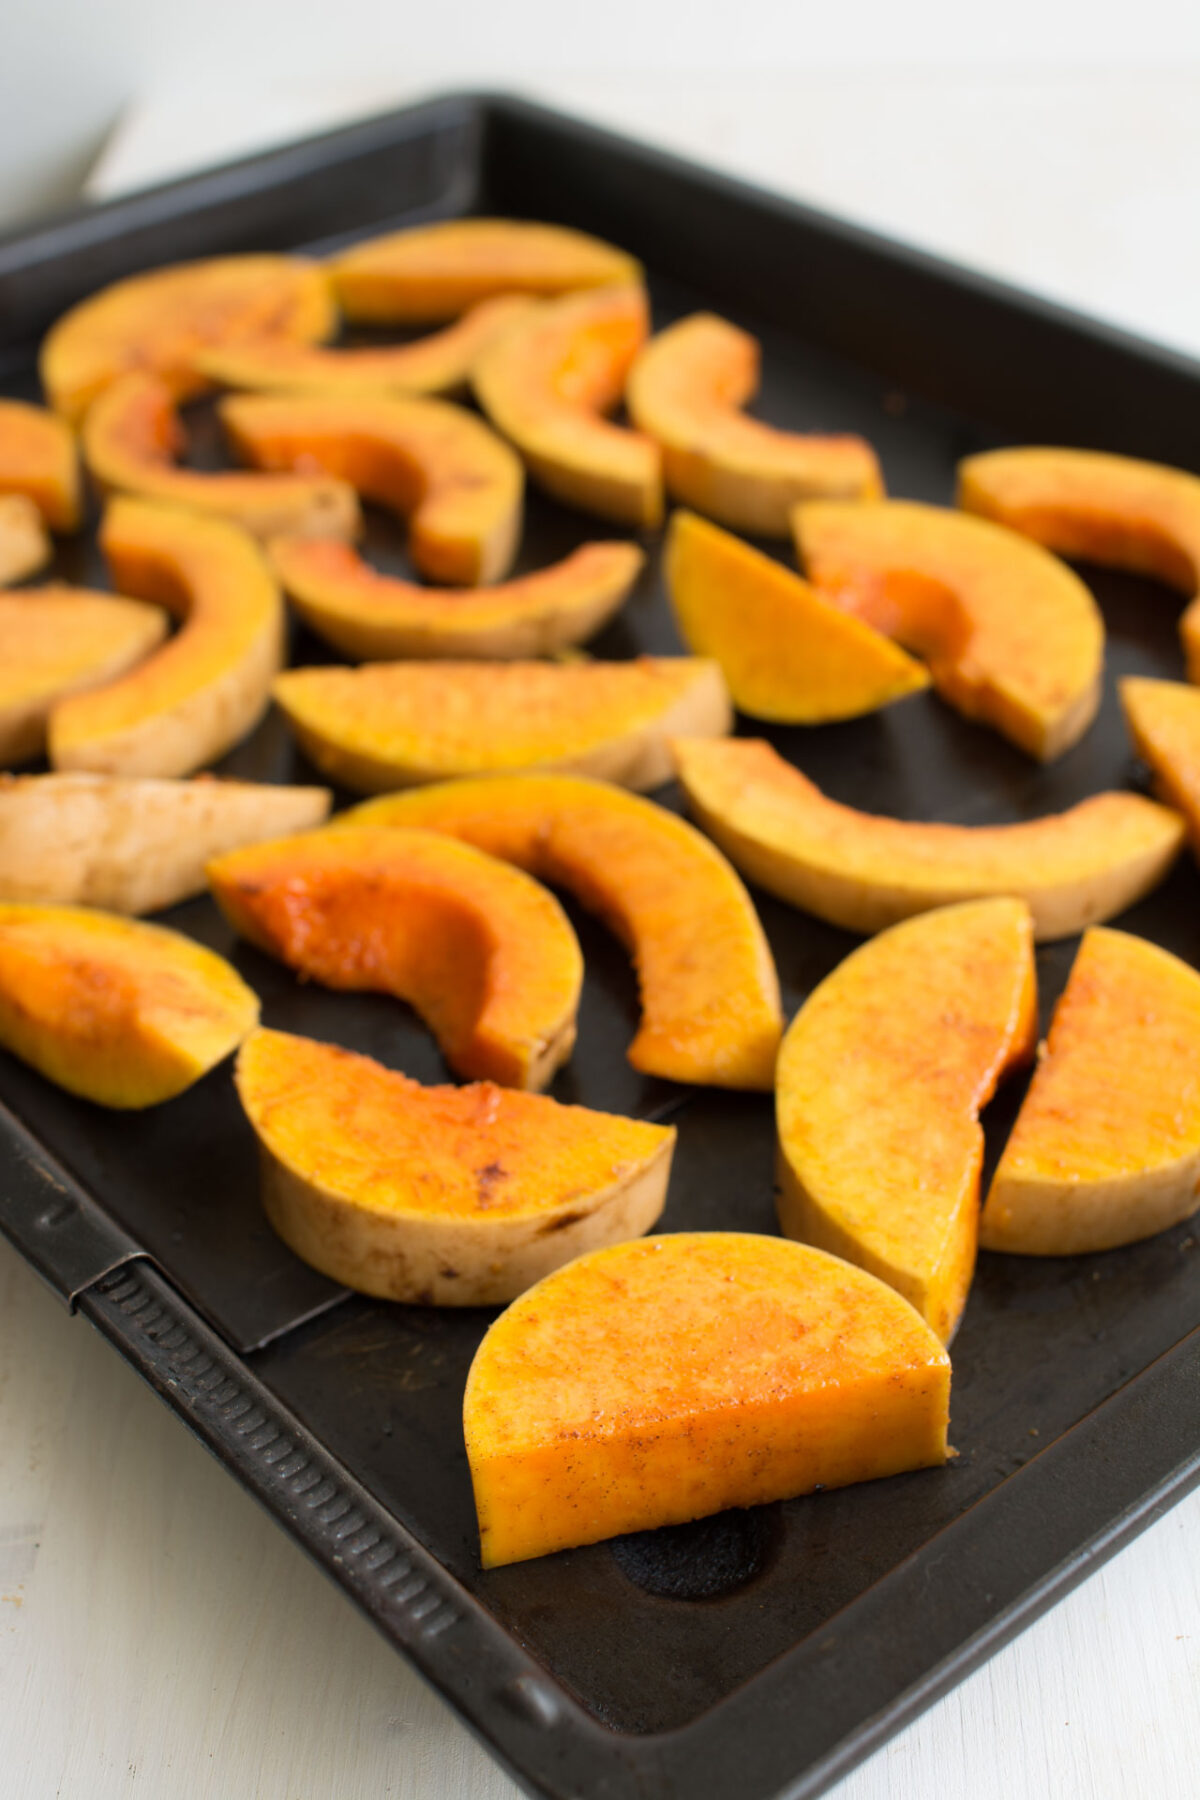 an image of sliced raw butternut squash spread evenly in a baking tray